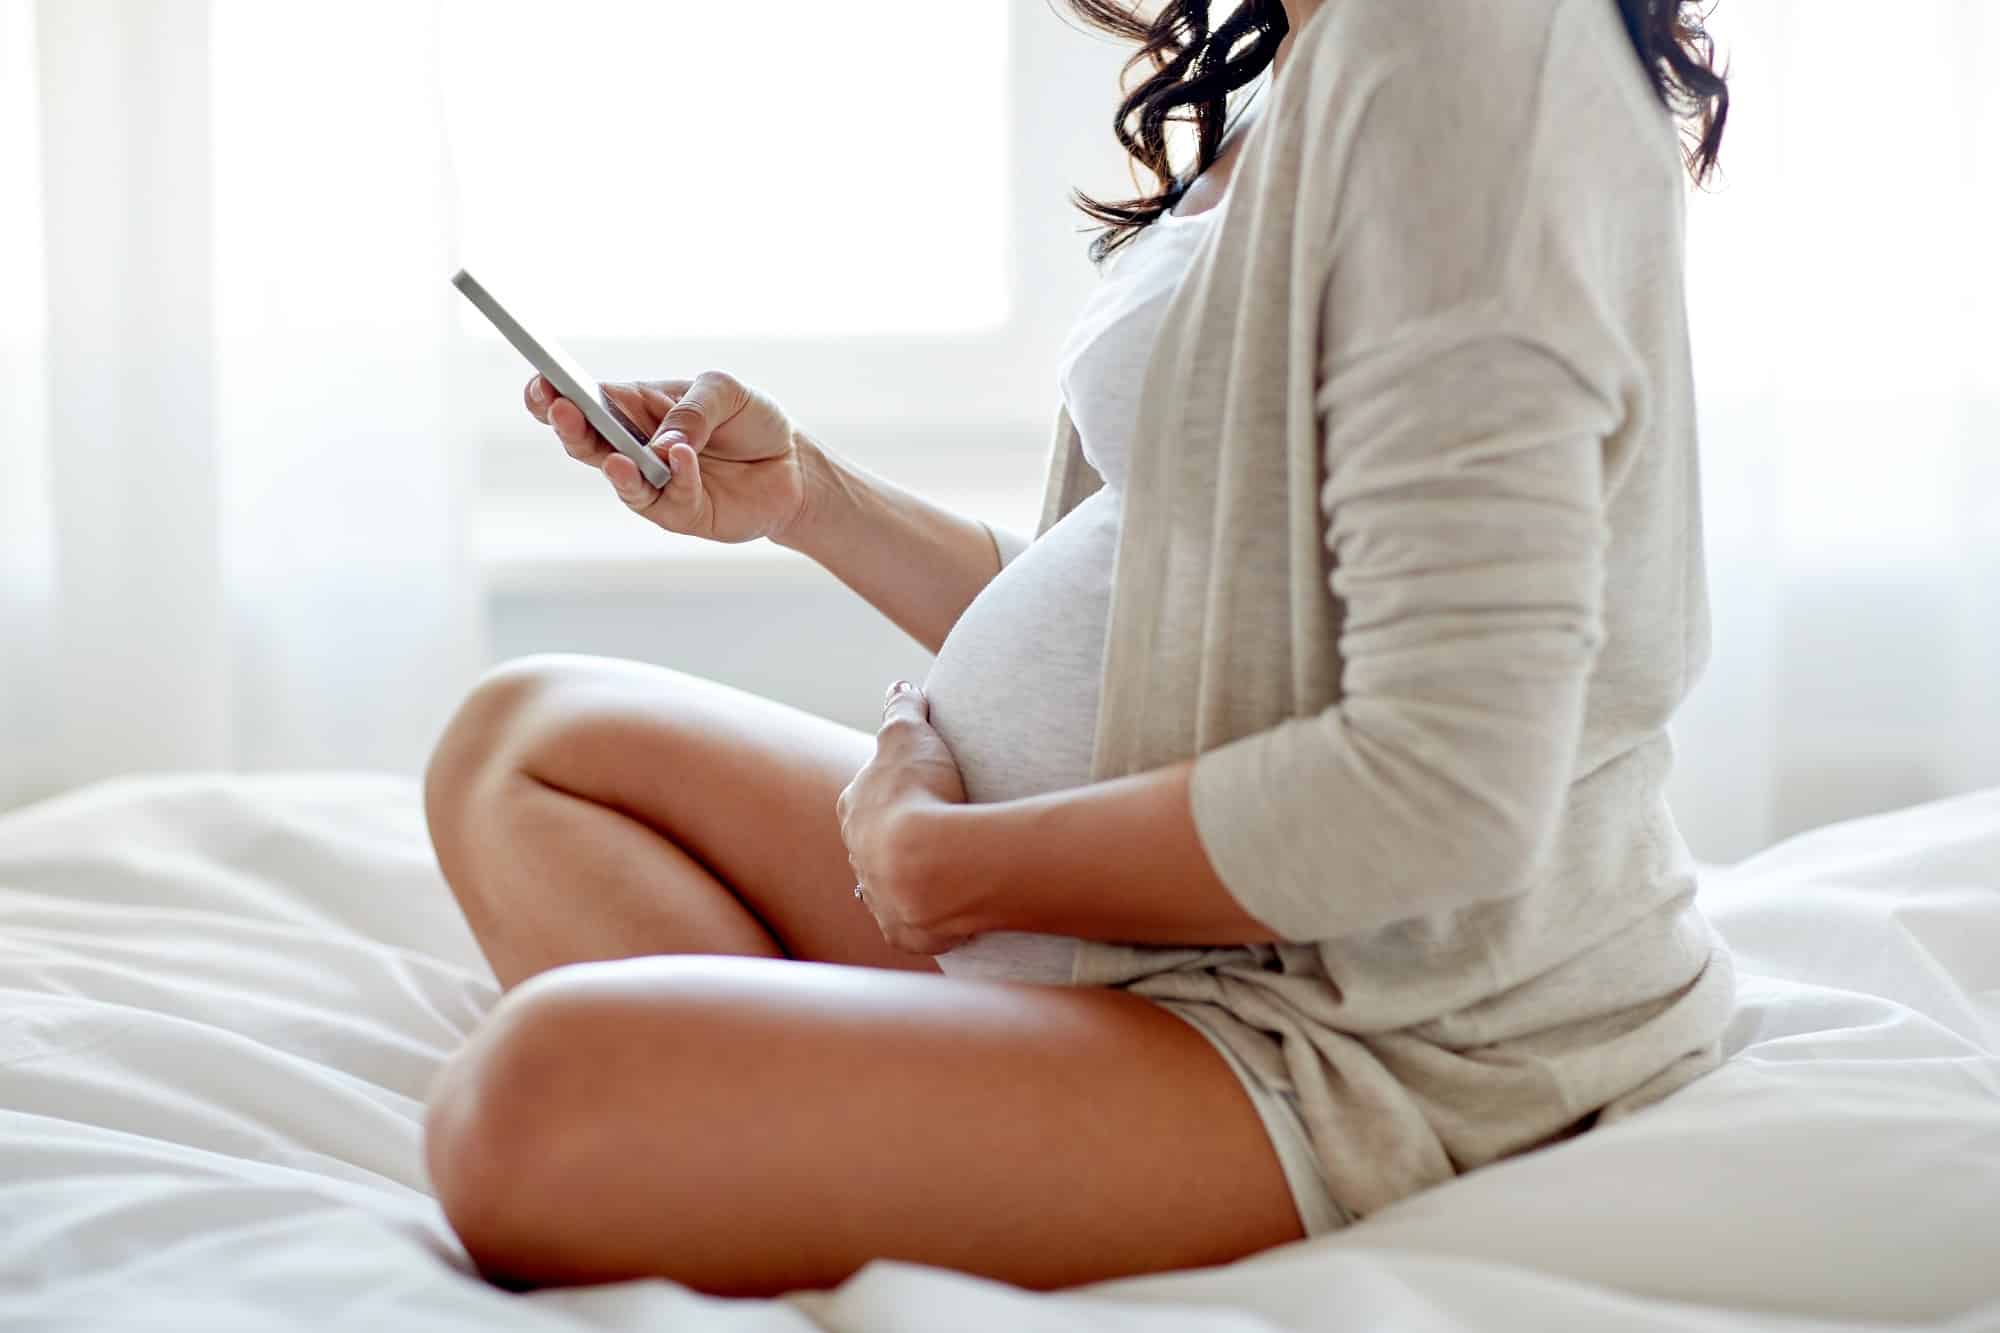 5 apps that moms-to-be will want to download immediately